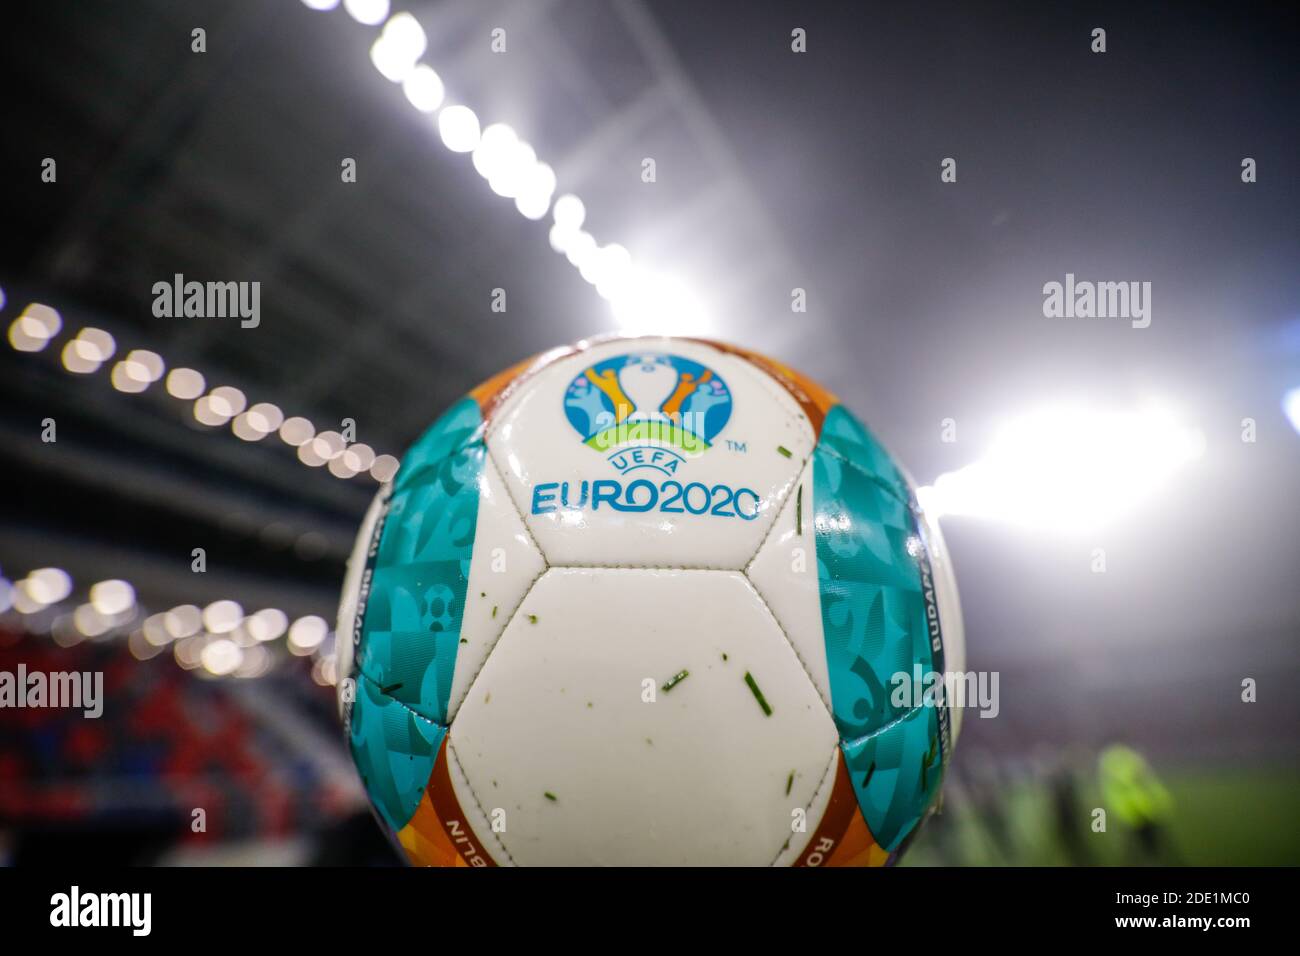 Bucharest, Romania - November 27, 2020: Details with a wet Euro 2020 official soccer match ball in a stadium. Stock Photo